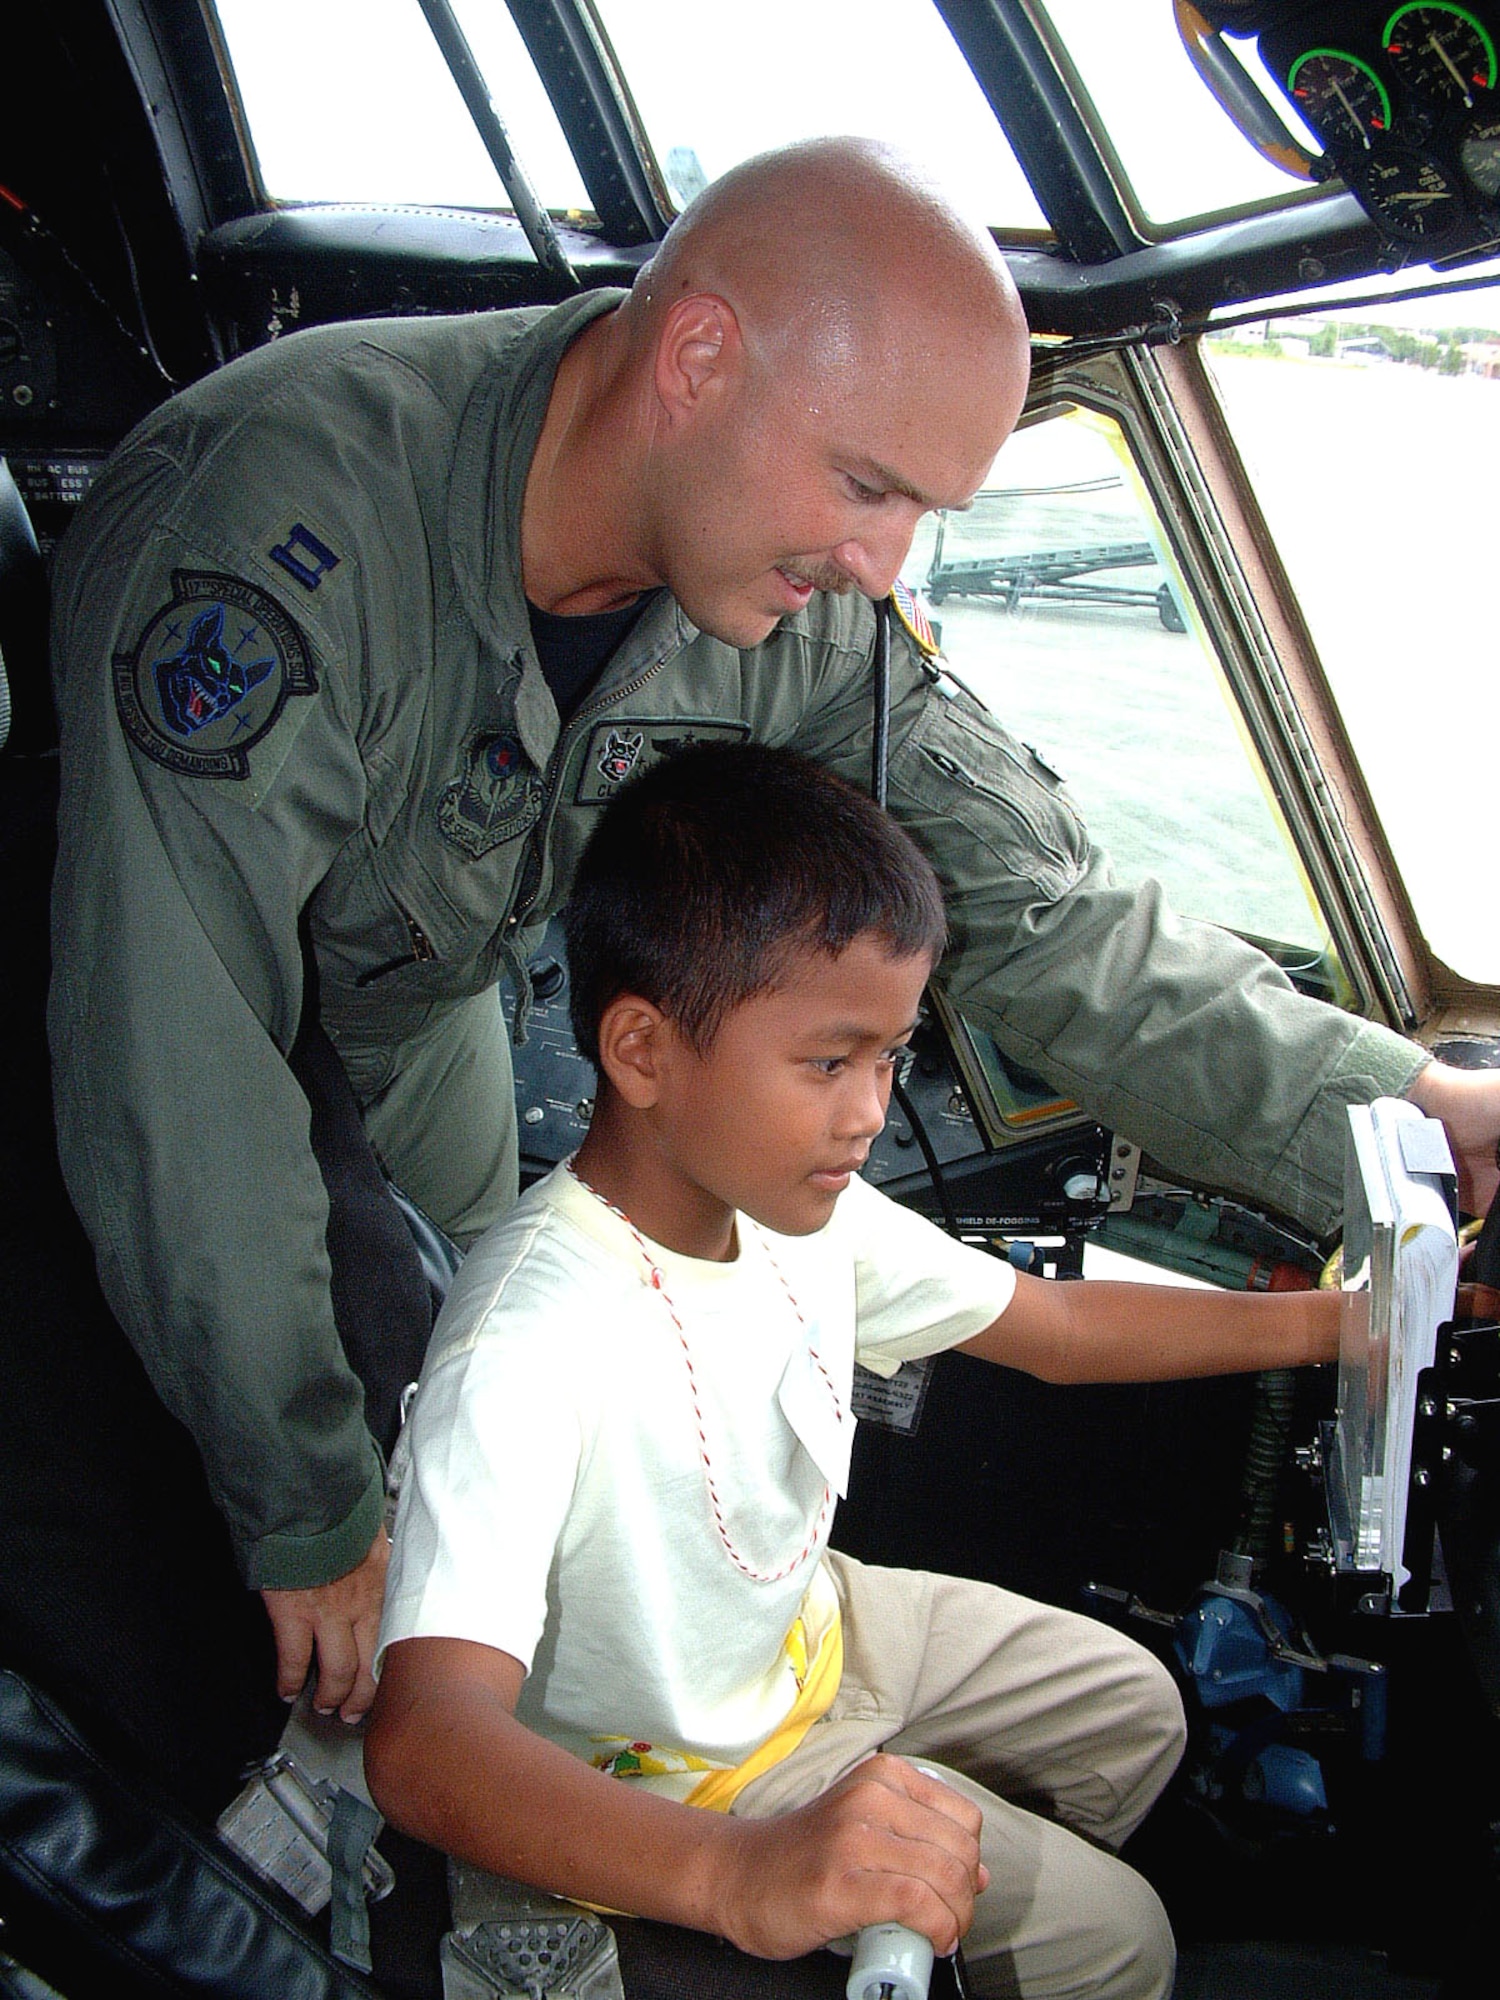 U-TAPAO AIR BASE, Thailand -- Capt. Clark Olander shows children from a nearby orphanage around the cockpit of an MC-130P Combat Shadow.  Olander is a 17th Special Operations Squadron navigator from Kadena Air Base, Japan.  His team is deployed here to train with other U.S. and Thai special operations forces.  (U.S. Air Force photo by Master Sgt. Michael Farris)